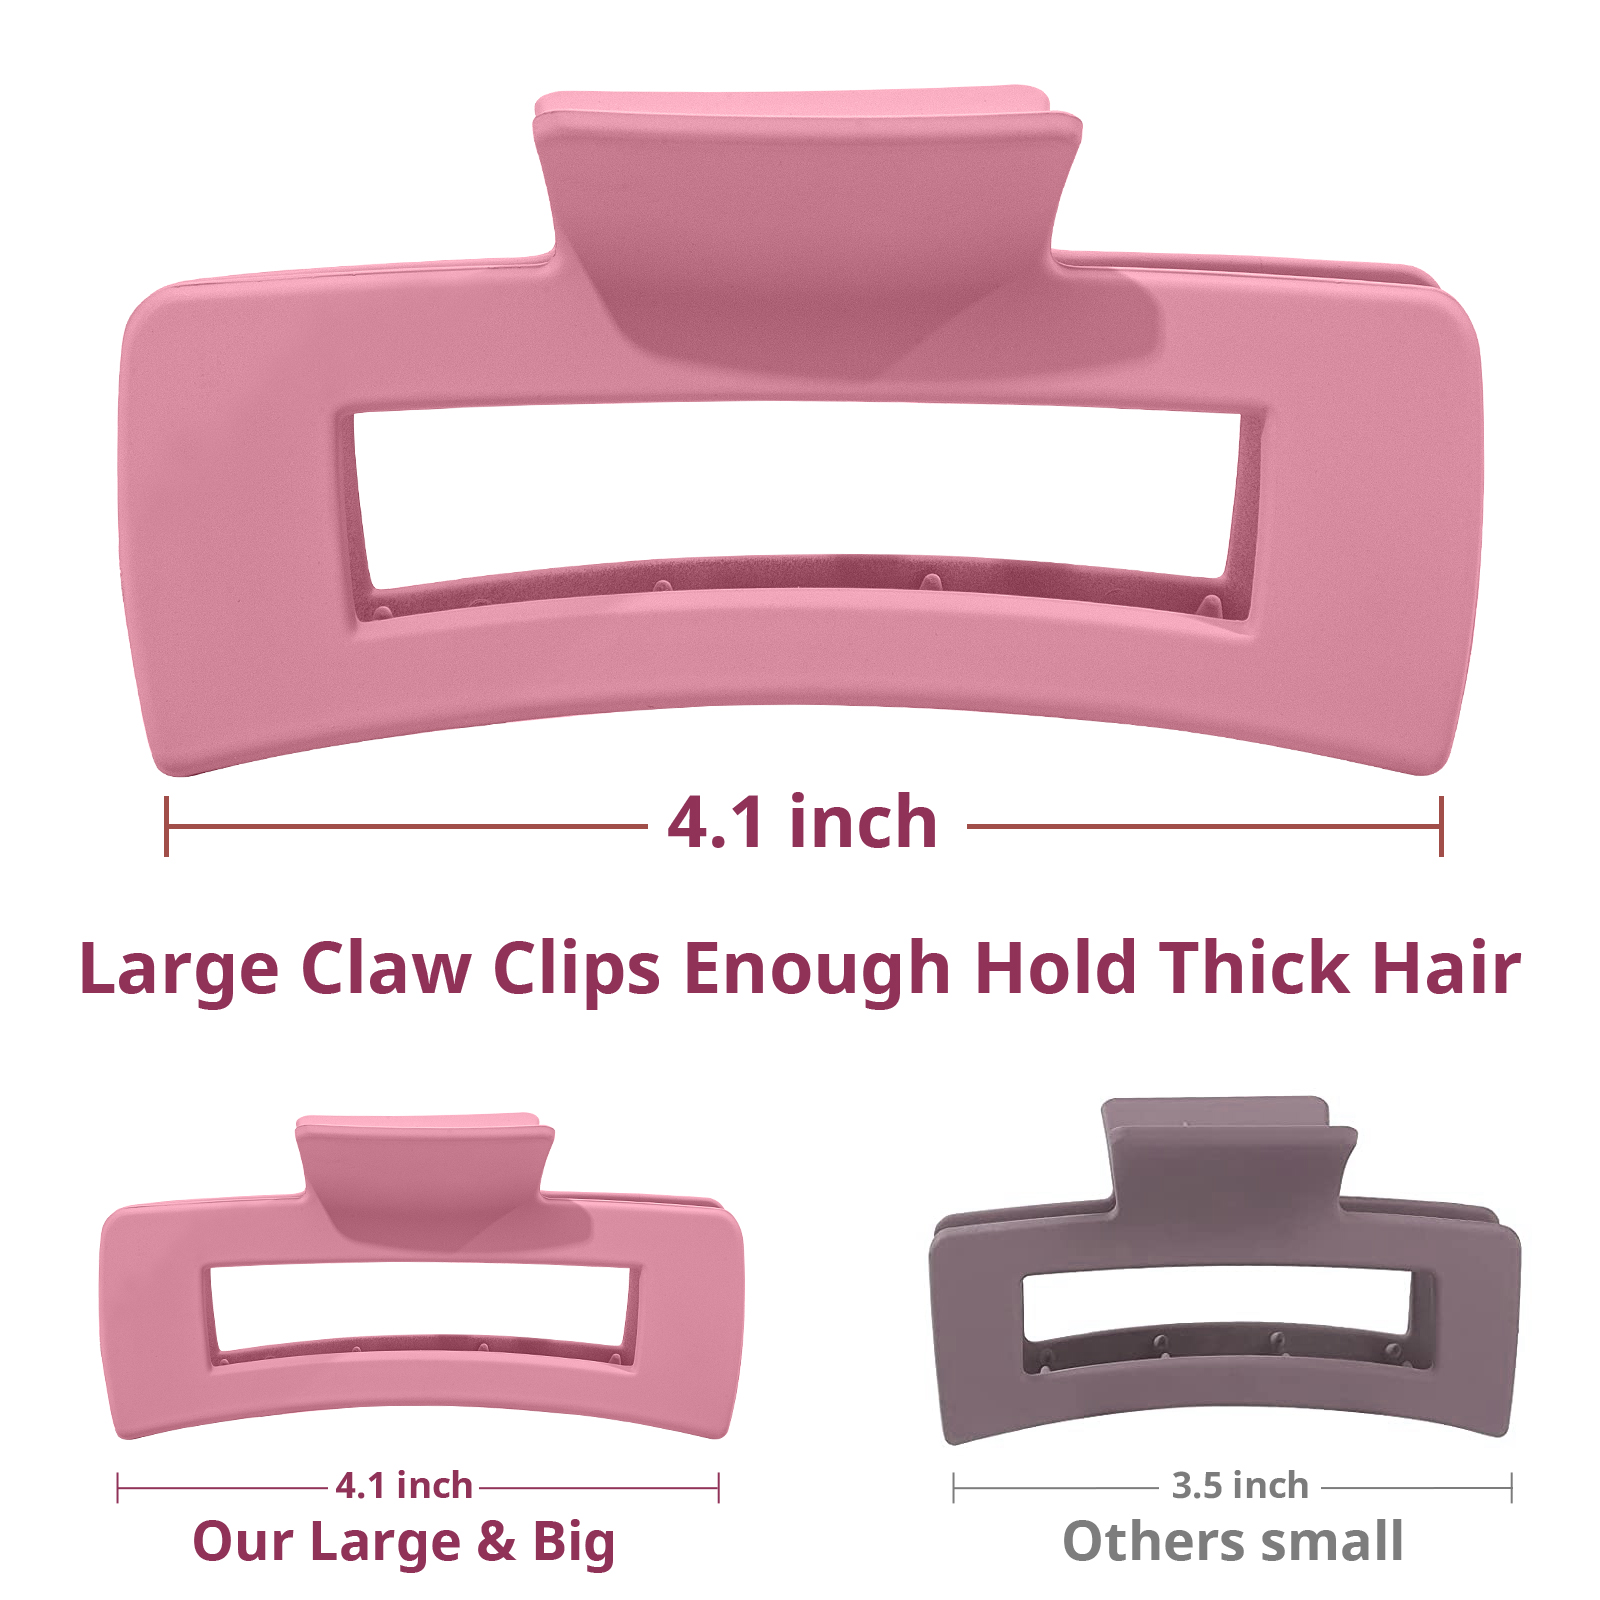 Vigorpace 12 Pack Large Hair Claw Clips for Women Thick Thin Hair, Rectangular Hair Clips for Styling Accessories, Strong Hold Matte Clip - image 4 of 7